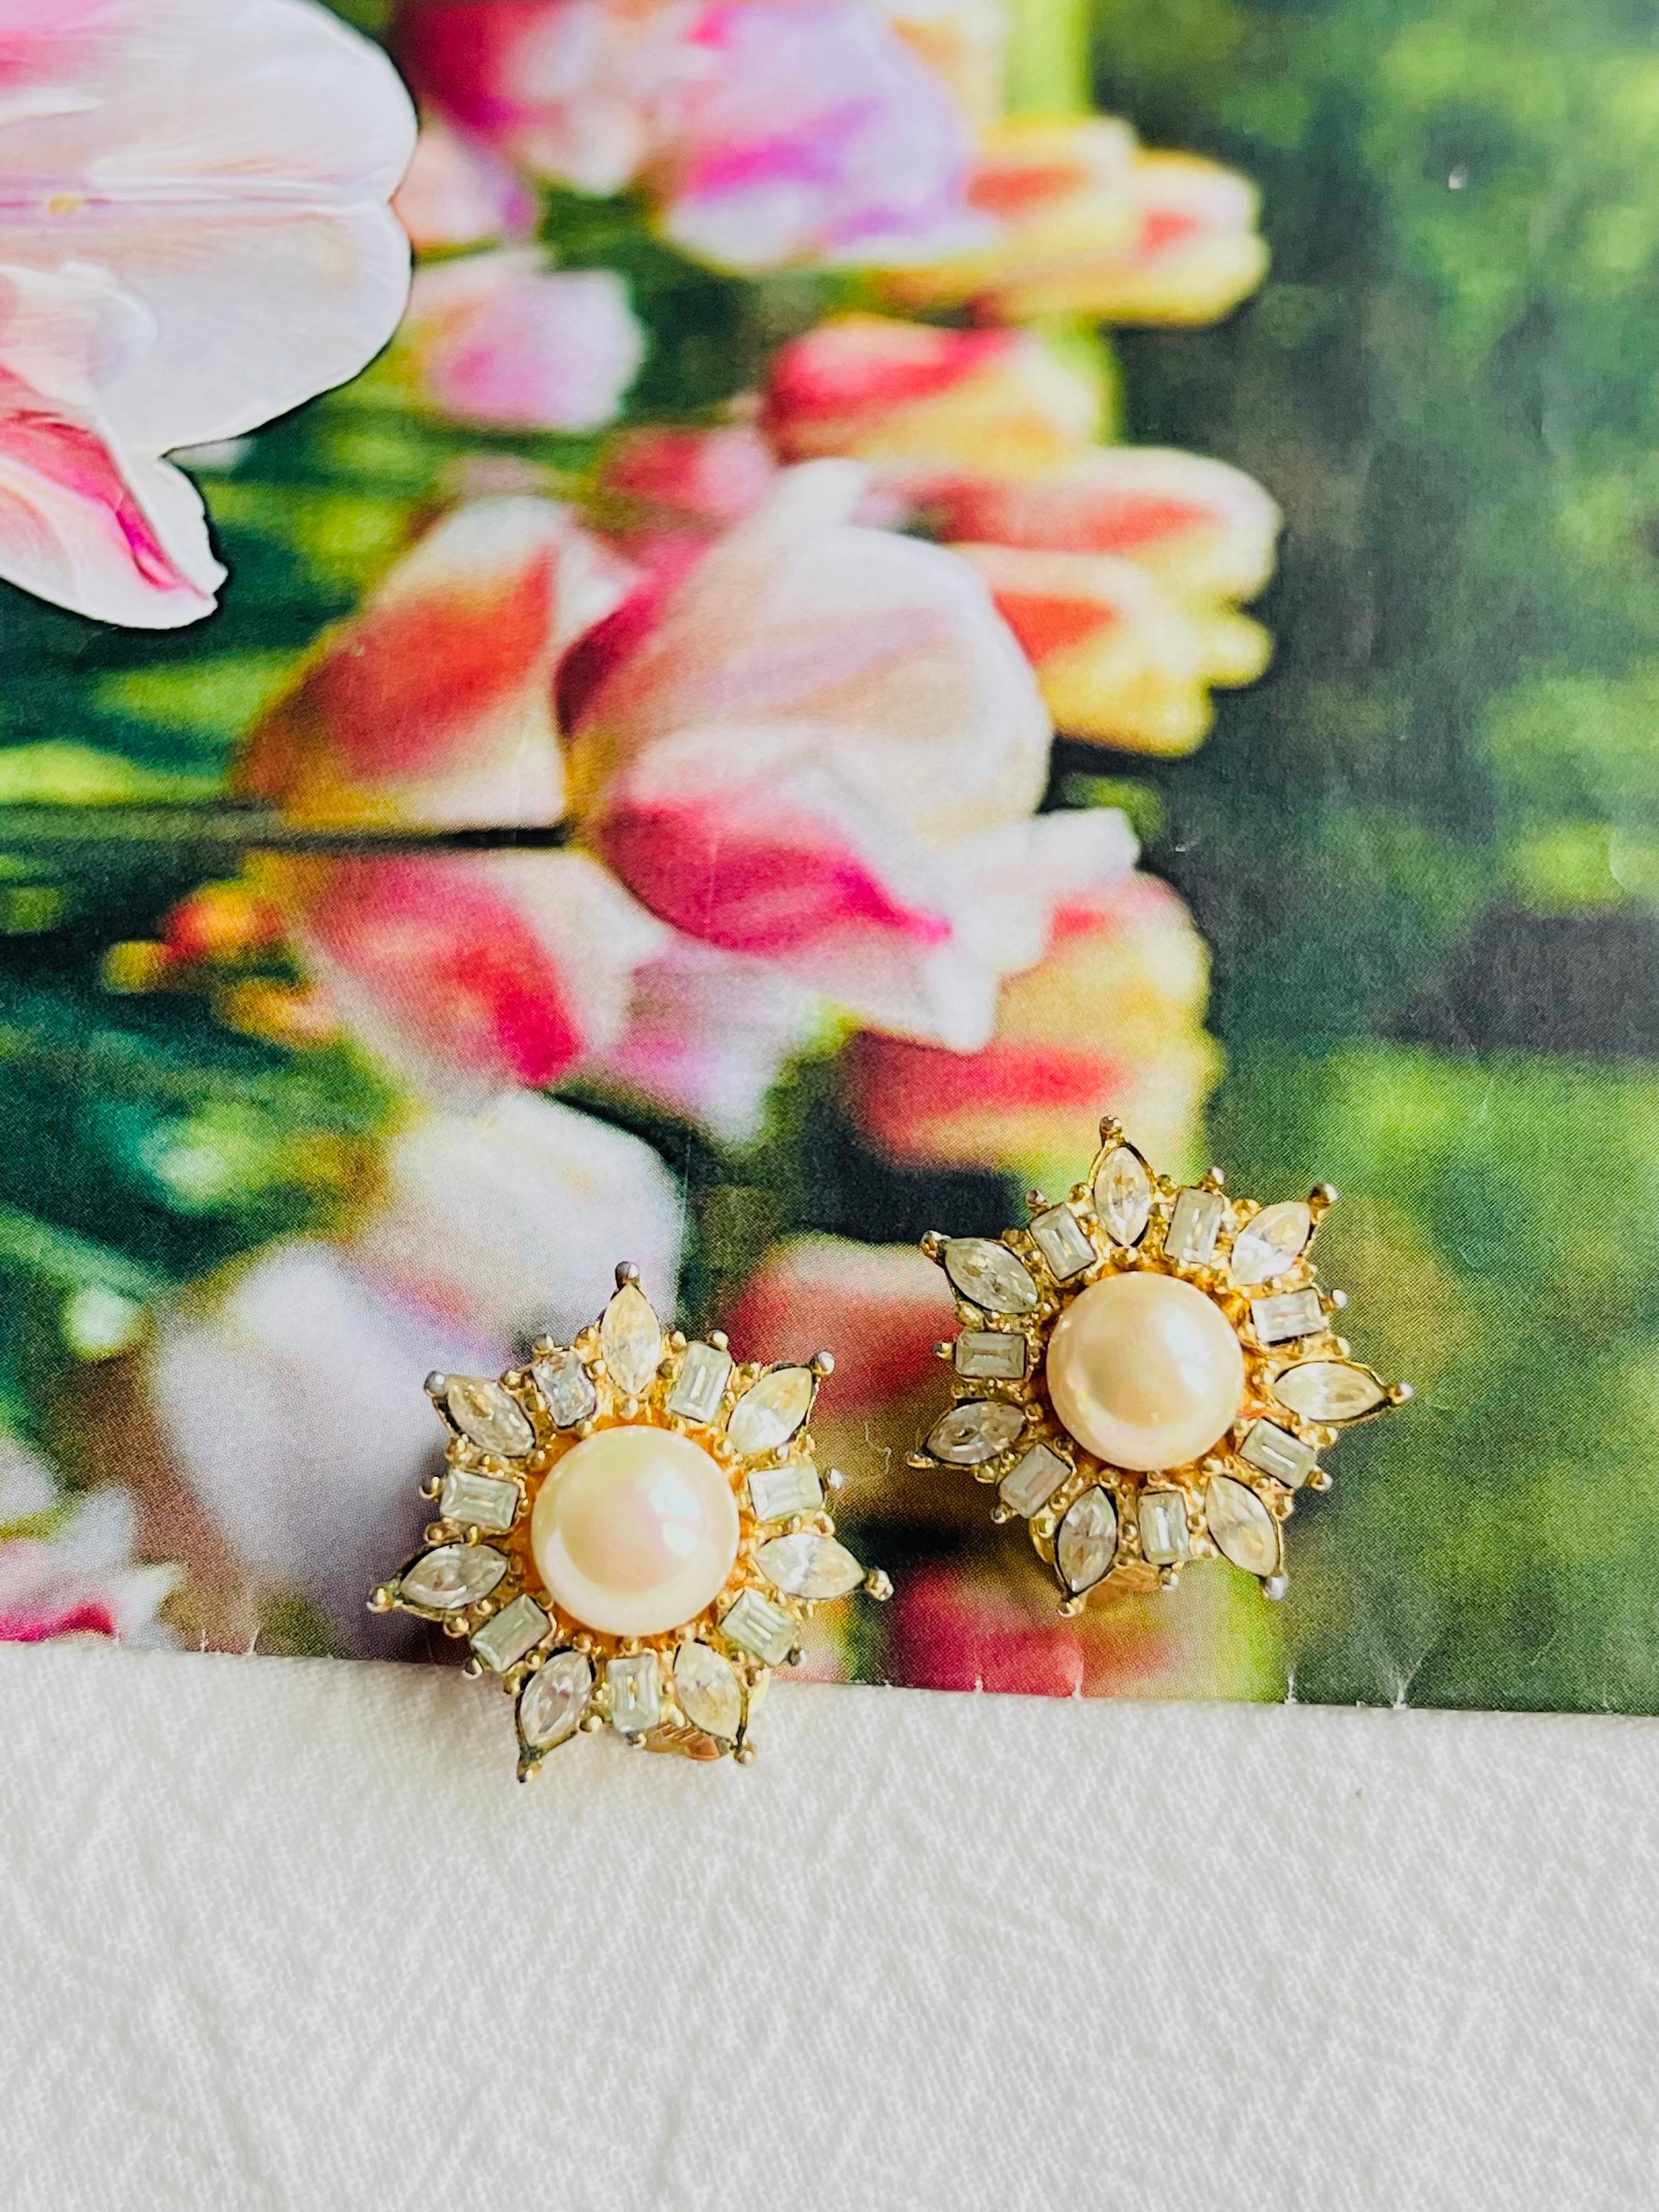 Christian Dior Vintage 1980s Radiant Flower Snowflake White Pearl Crystals Clip Earrings, Gold Plated

Very good condition. Some light scratches and colour loss, barely noticeable. 100% Genuine.

A very beautiful pair of earrings by Chr. DIOR,